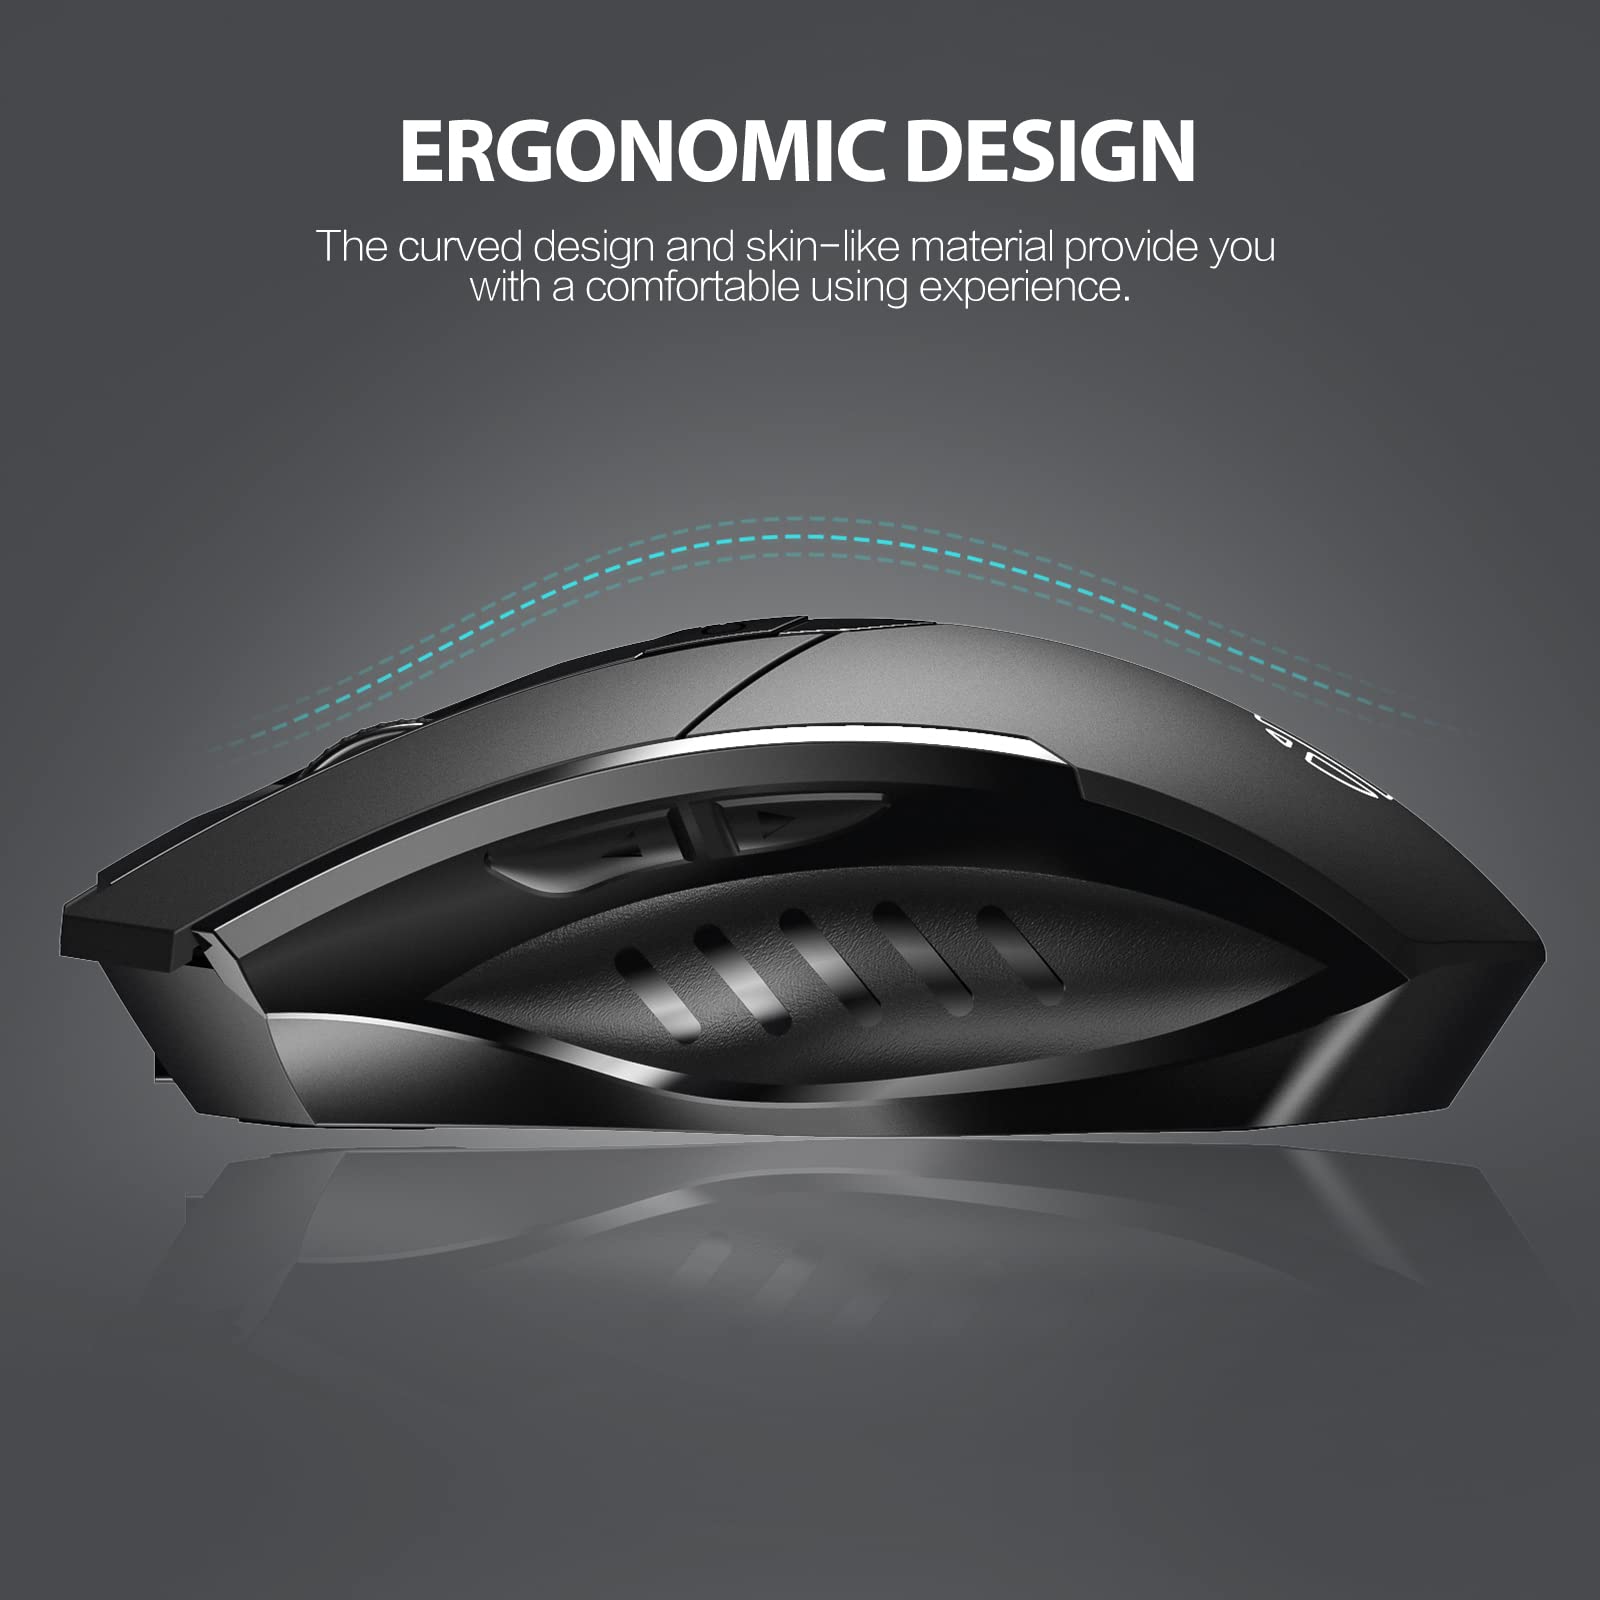 INPHIC Bluetooth Mouse, 3 Modes Bluetooth 5.0&4.0 Mouse 2.4G Rechargeable Wireless Mouse with 6 Buttons, Ergonomic Computer Mouse for Laptop, Computer, Mac, PC etc.